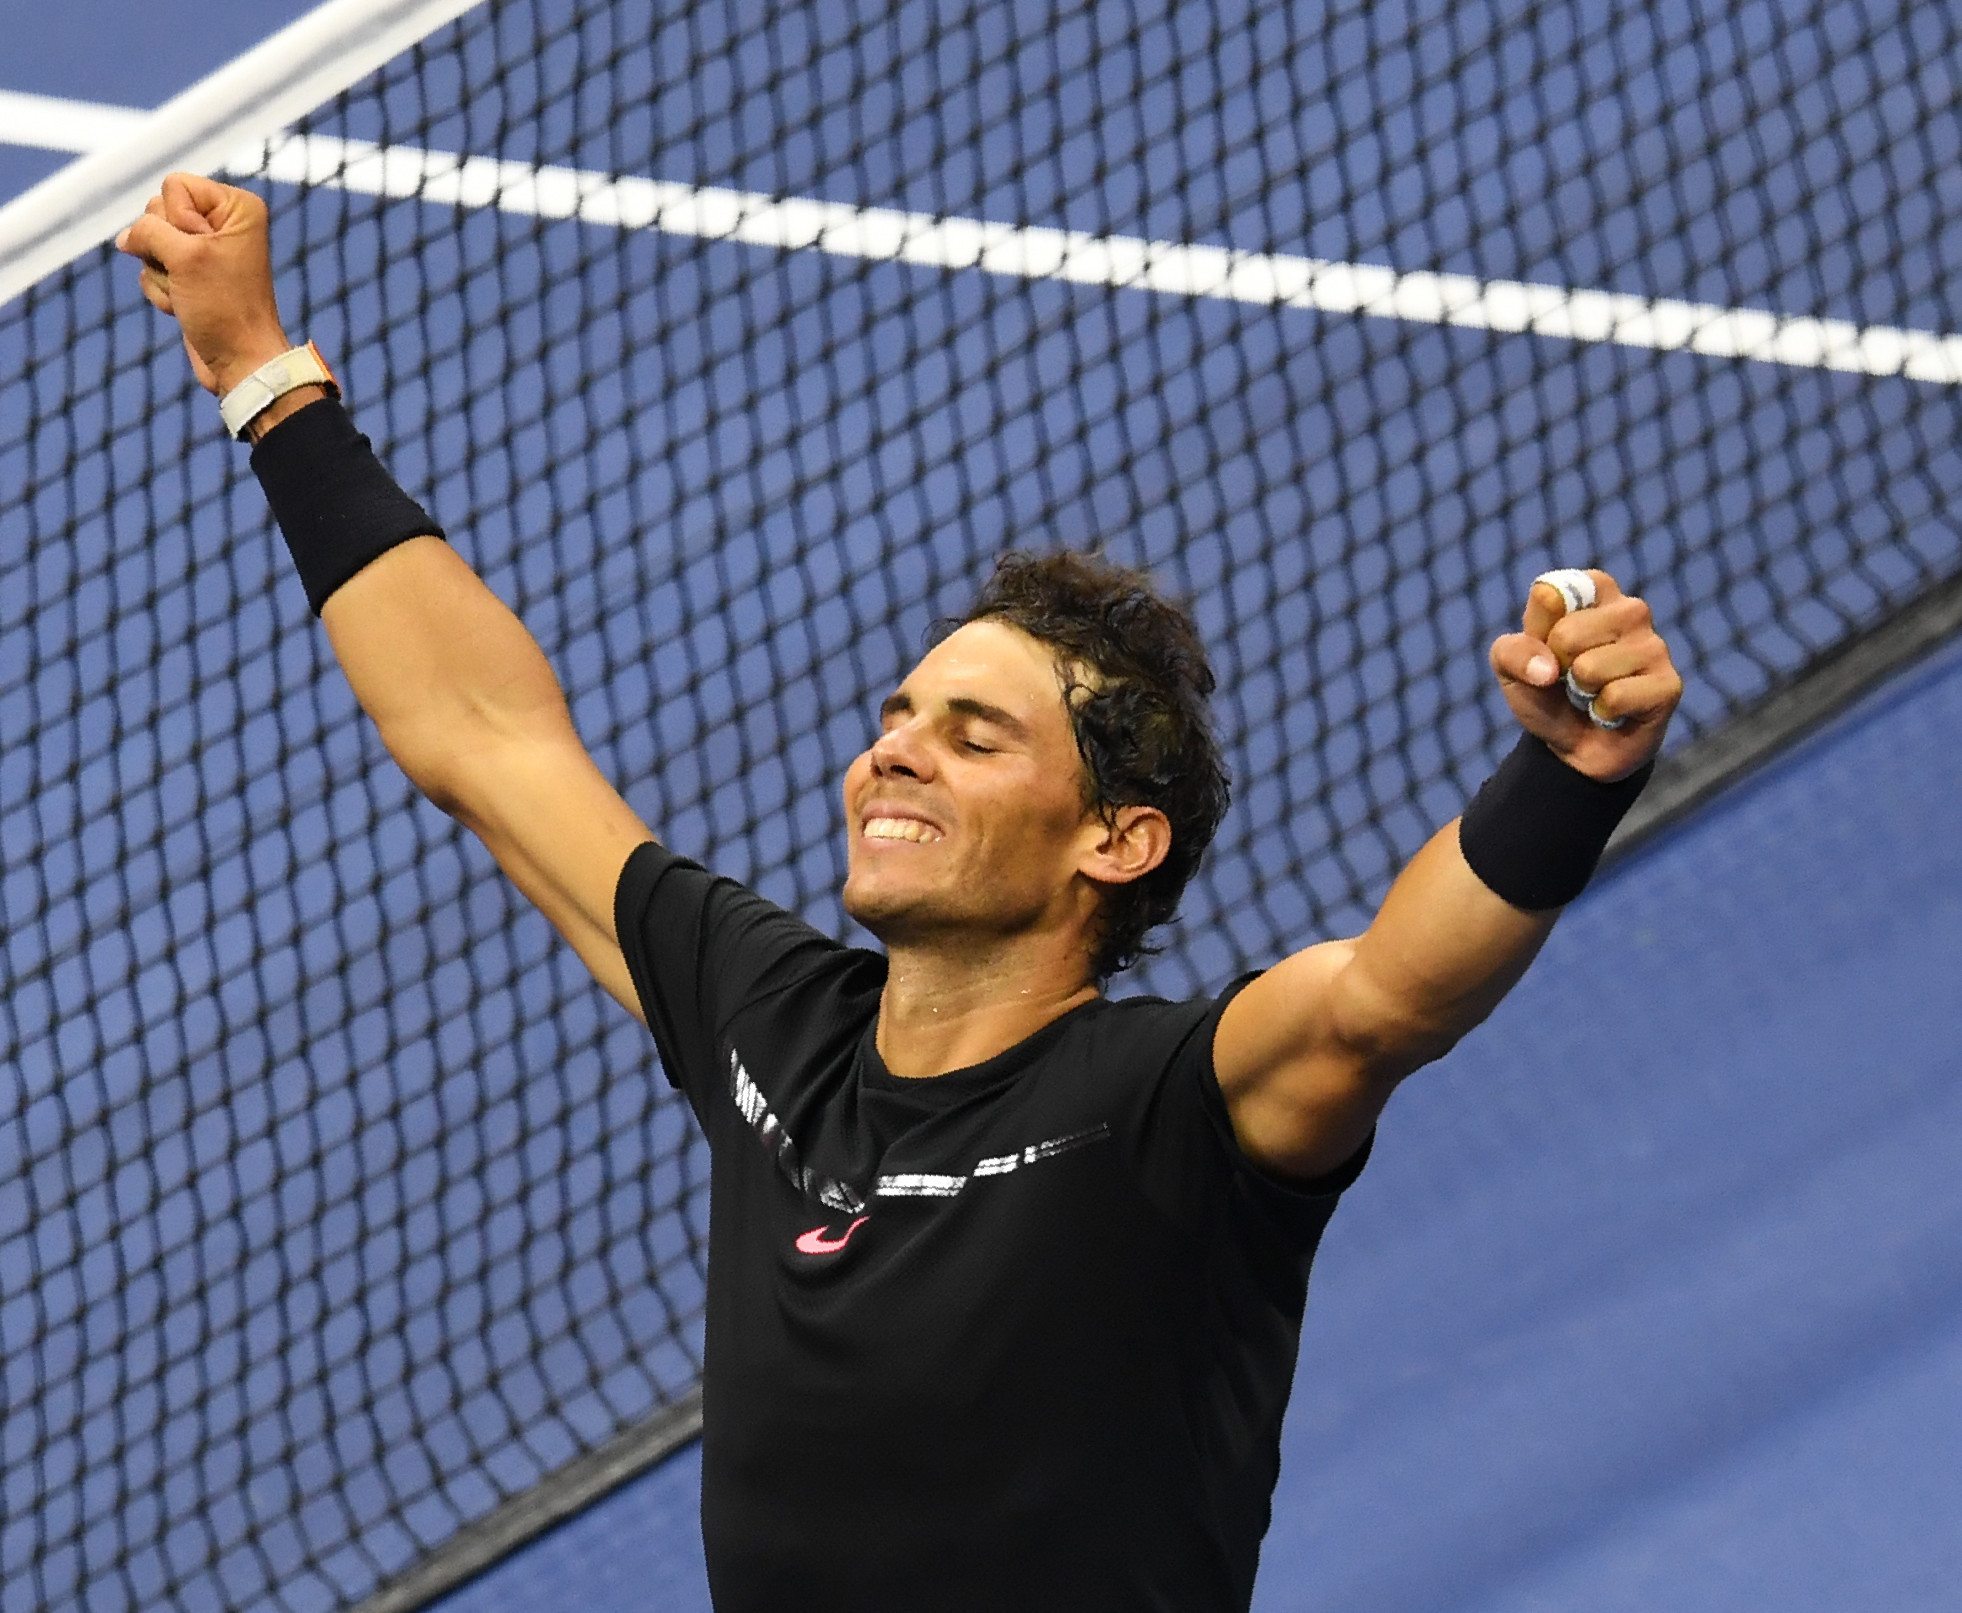 Top seed Rafael Nadal came from behind against Argentina’s Juan Martin del Potro to set up a US Open men’s singles final with South Africa’s Kevin Anderson ©Getty Images